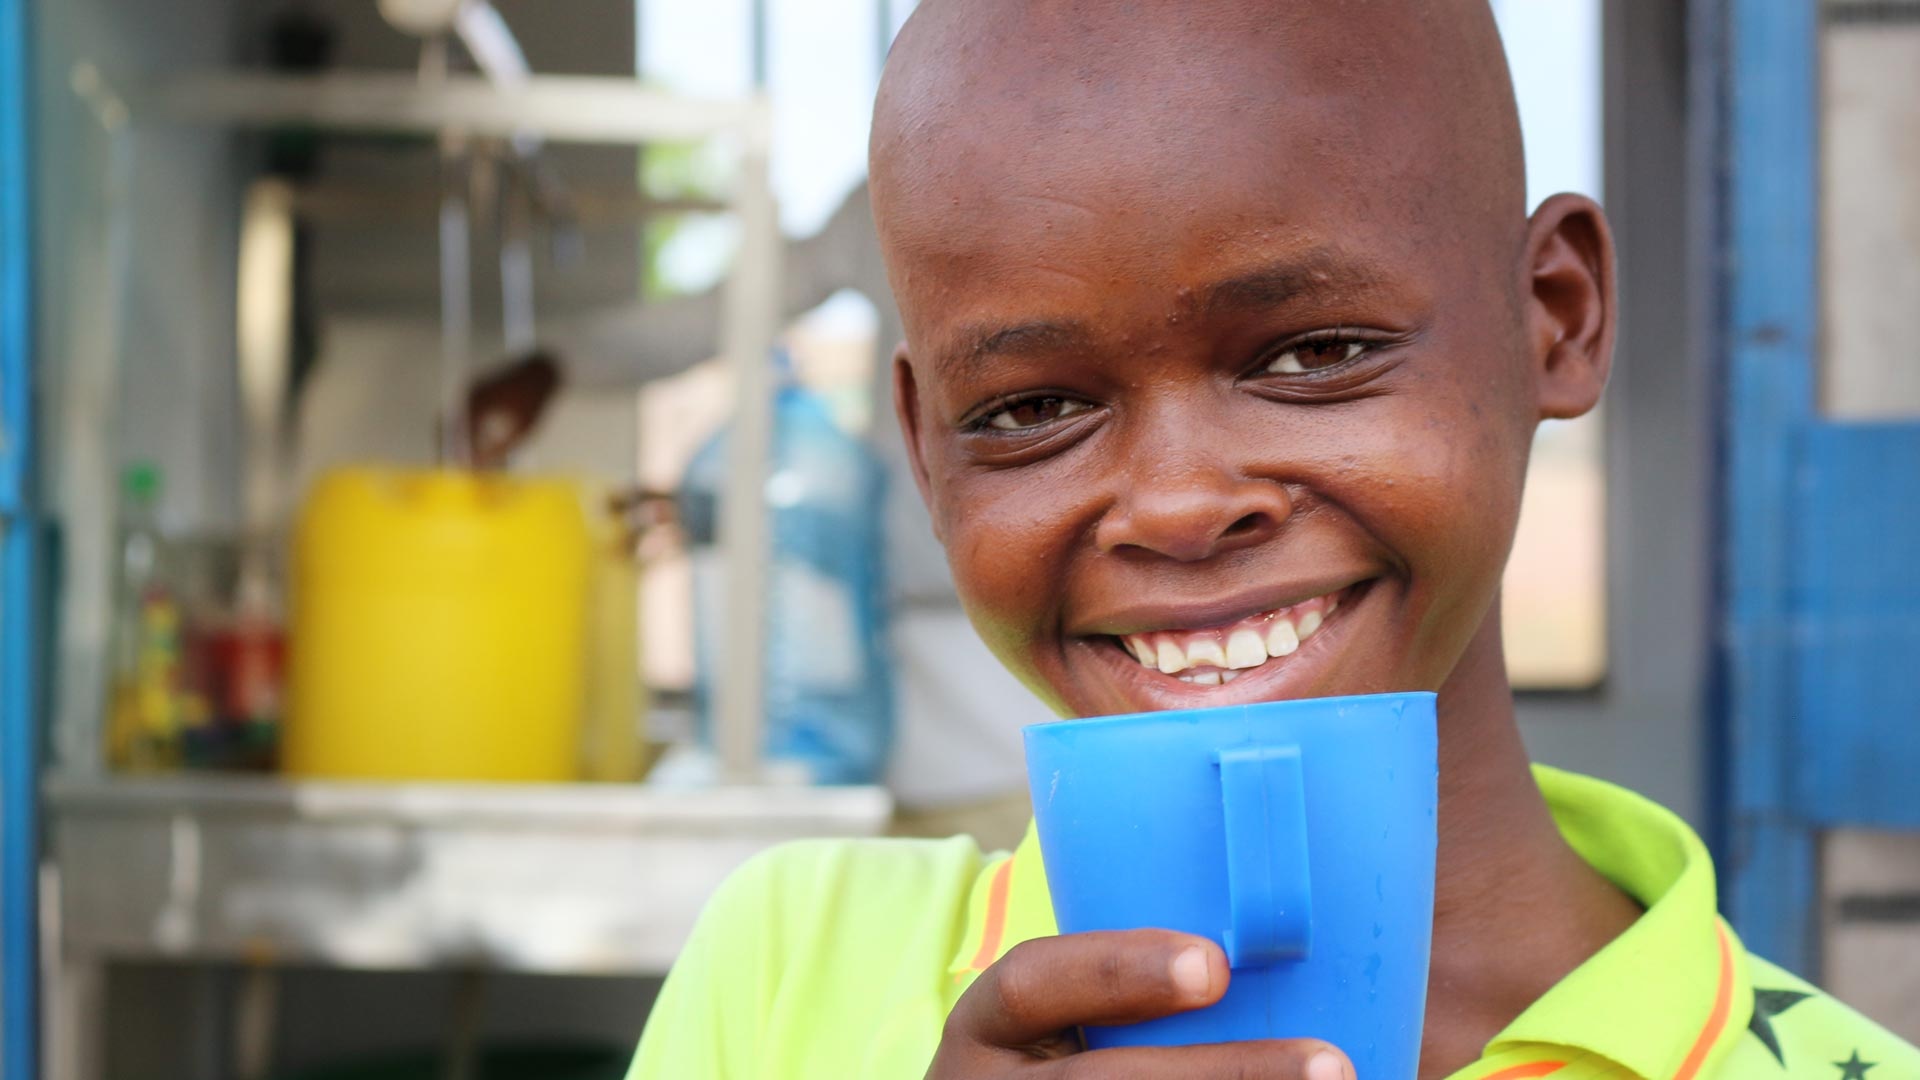 A Kenyan boy drinks water from a blue water cup and smiles.